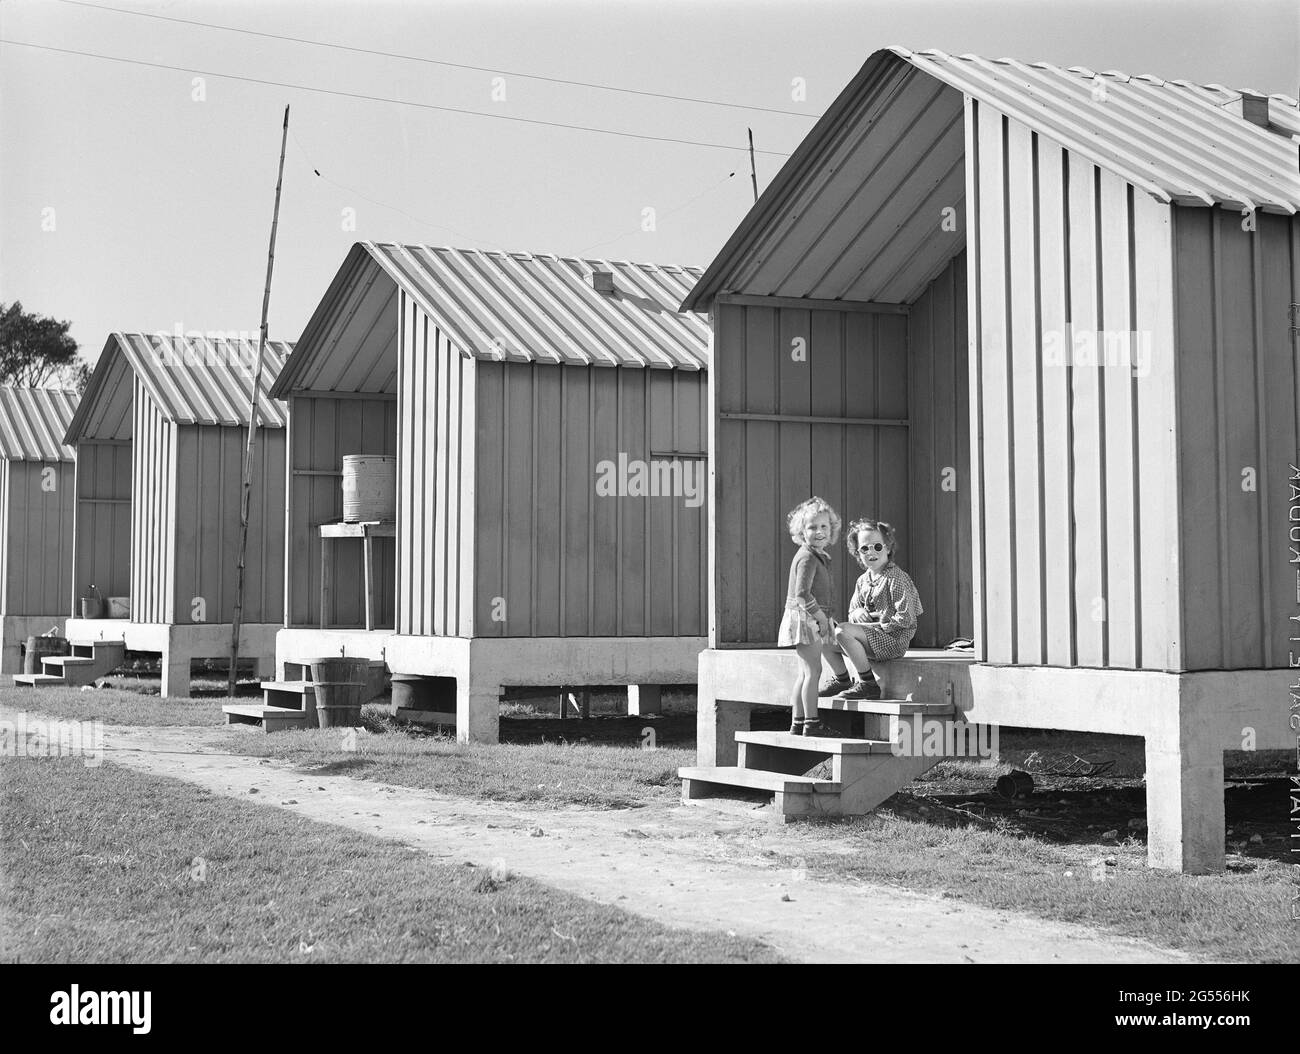 Metal Shelters for Agricultural and Packing House Workers, Osceola Migratory Labor Camp, Belle Glade, Florida, USA, Marion Post Wolcott, U.S. Farm Security Administration, February 1941 Stock Photo